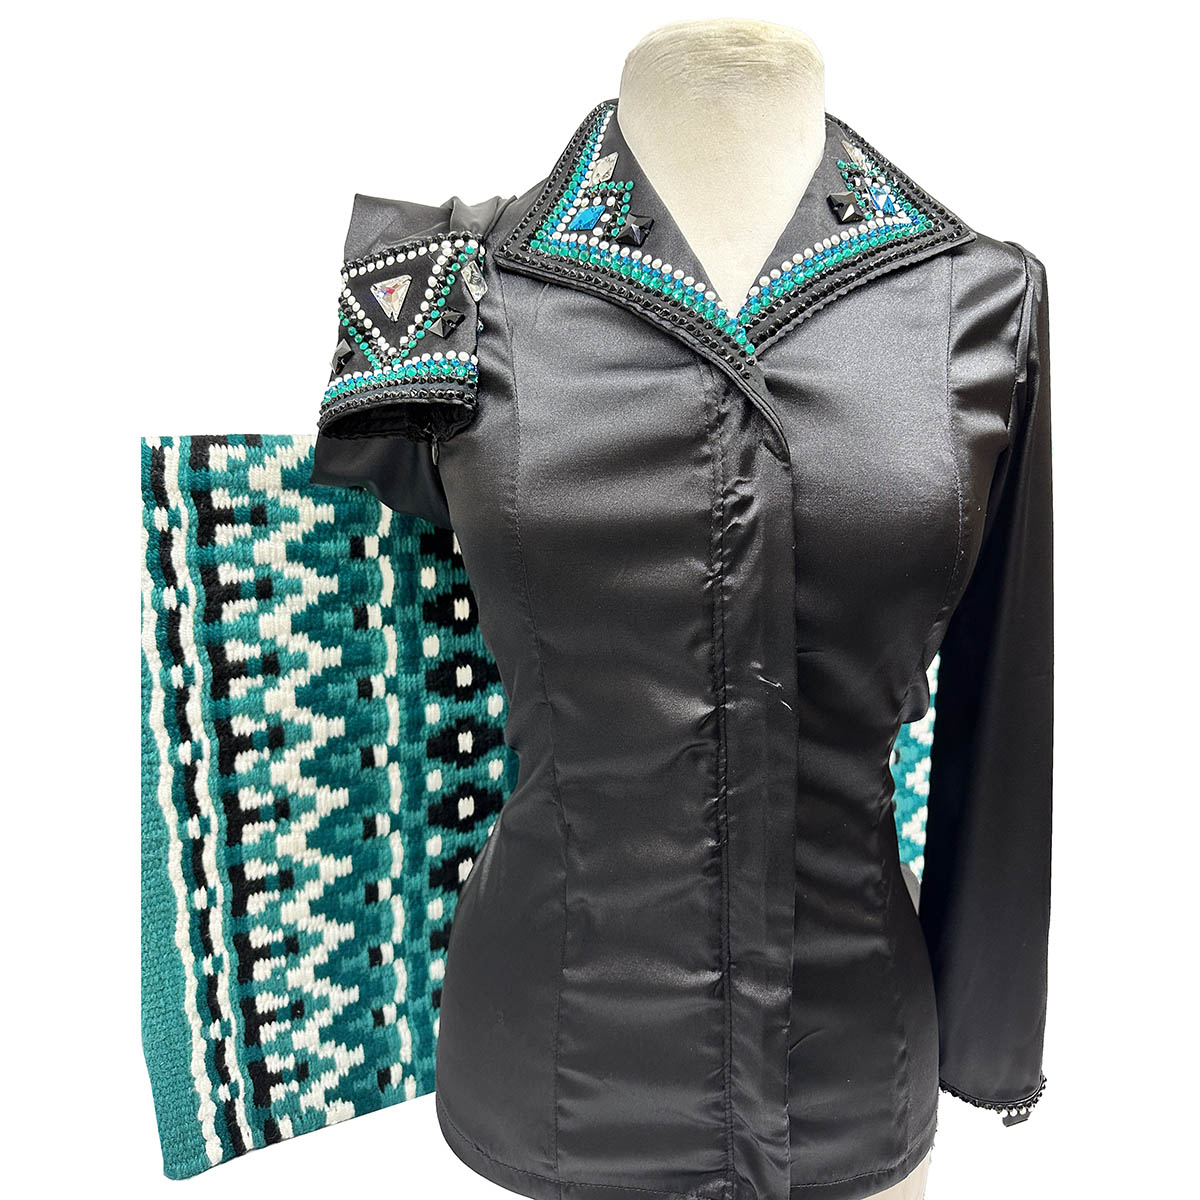 Black Charmuese with Emerald Show Shirt shown with matching saddle pad